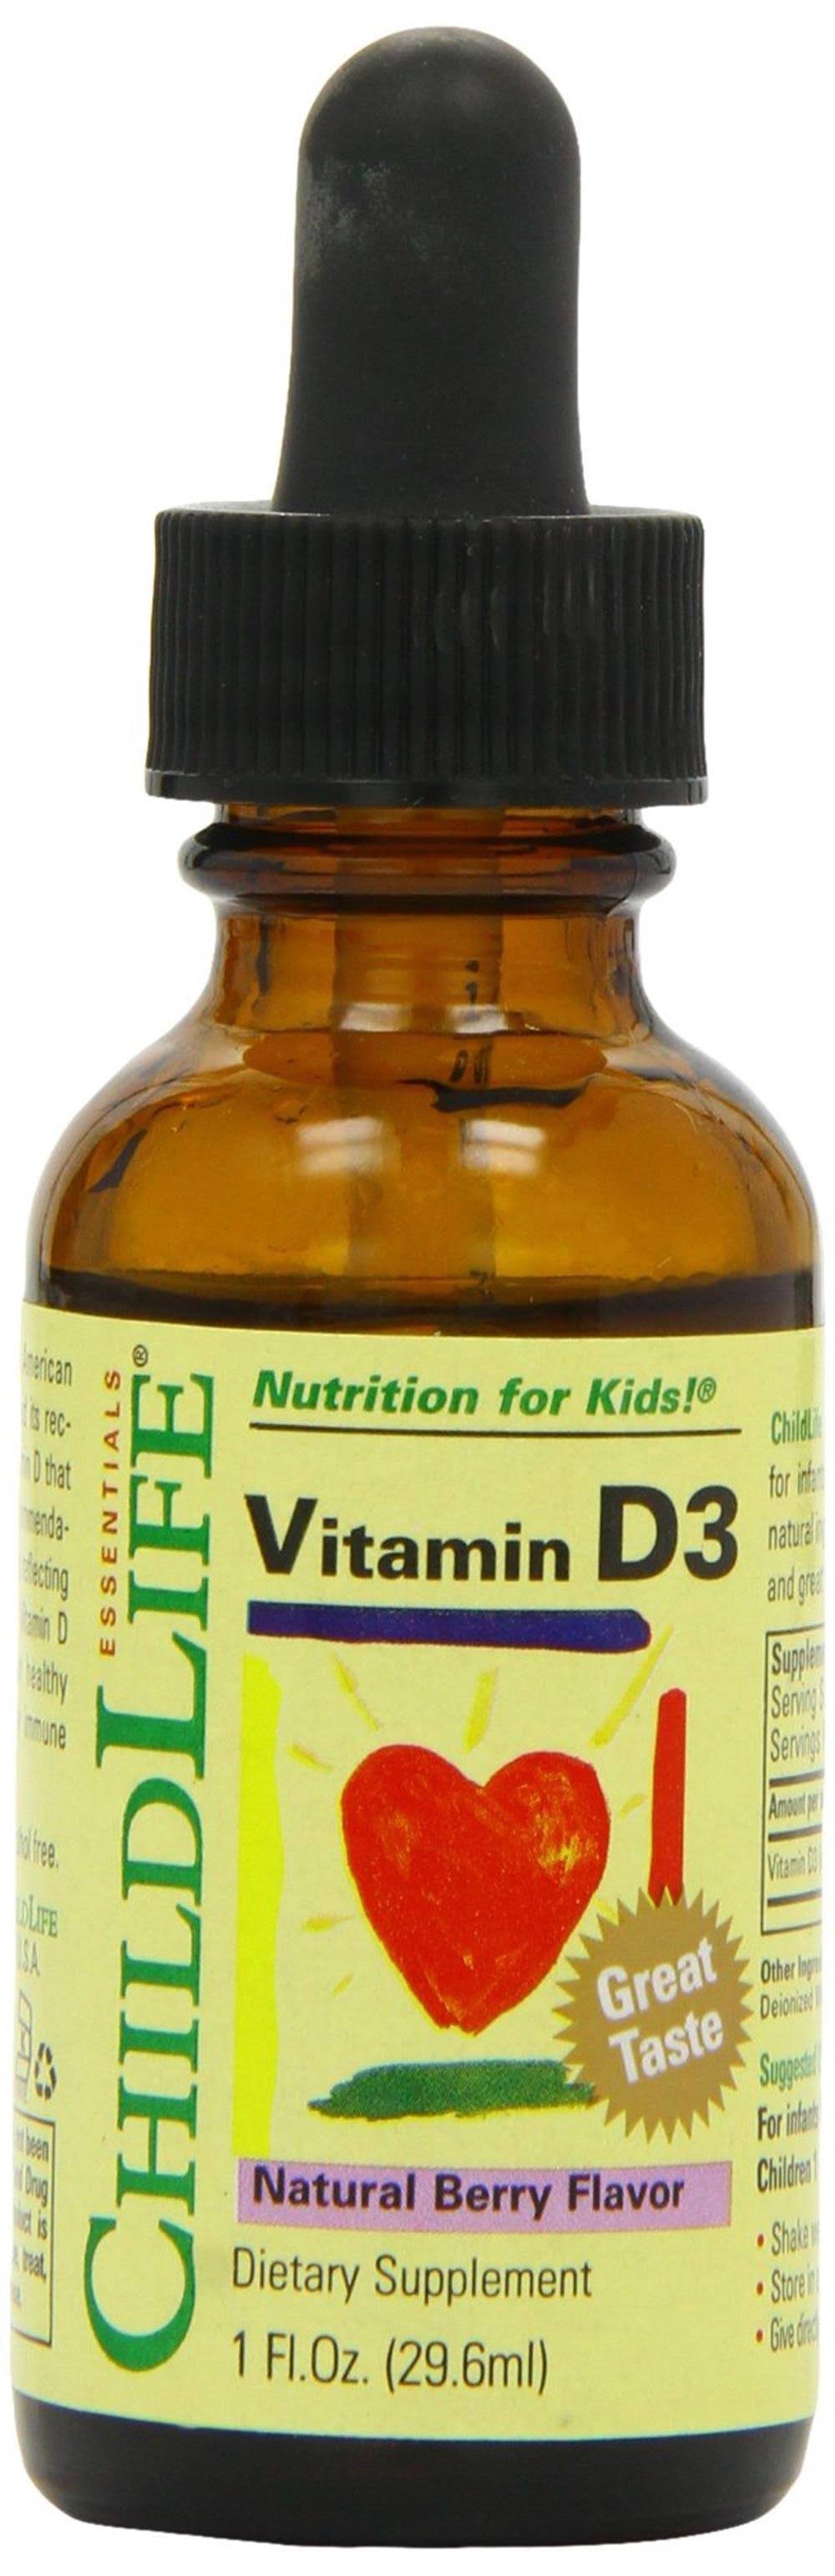 Child Life Vitamin D3 Dietary Supplement - Natural Berry, 29.6ml